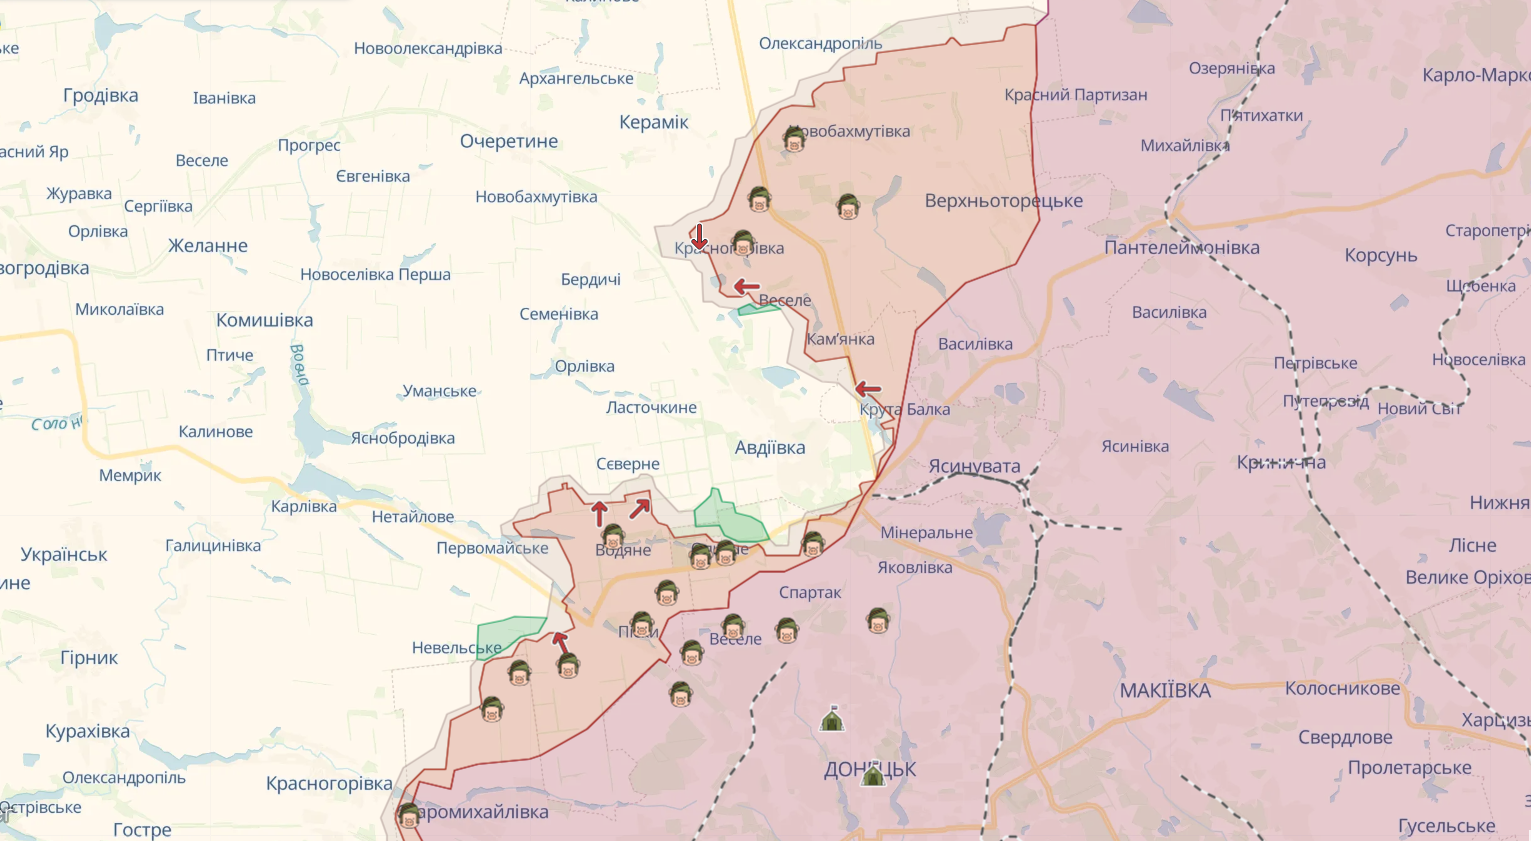 Avdiivka RMA head says Russia is pulling forces near the city, so AFU is preparing for the third wave